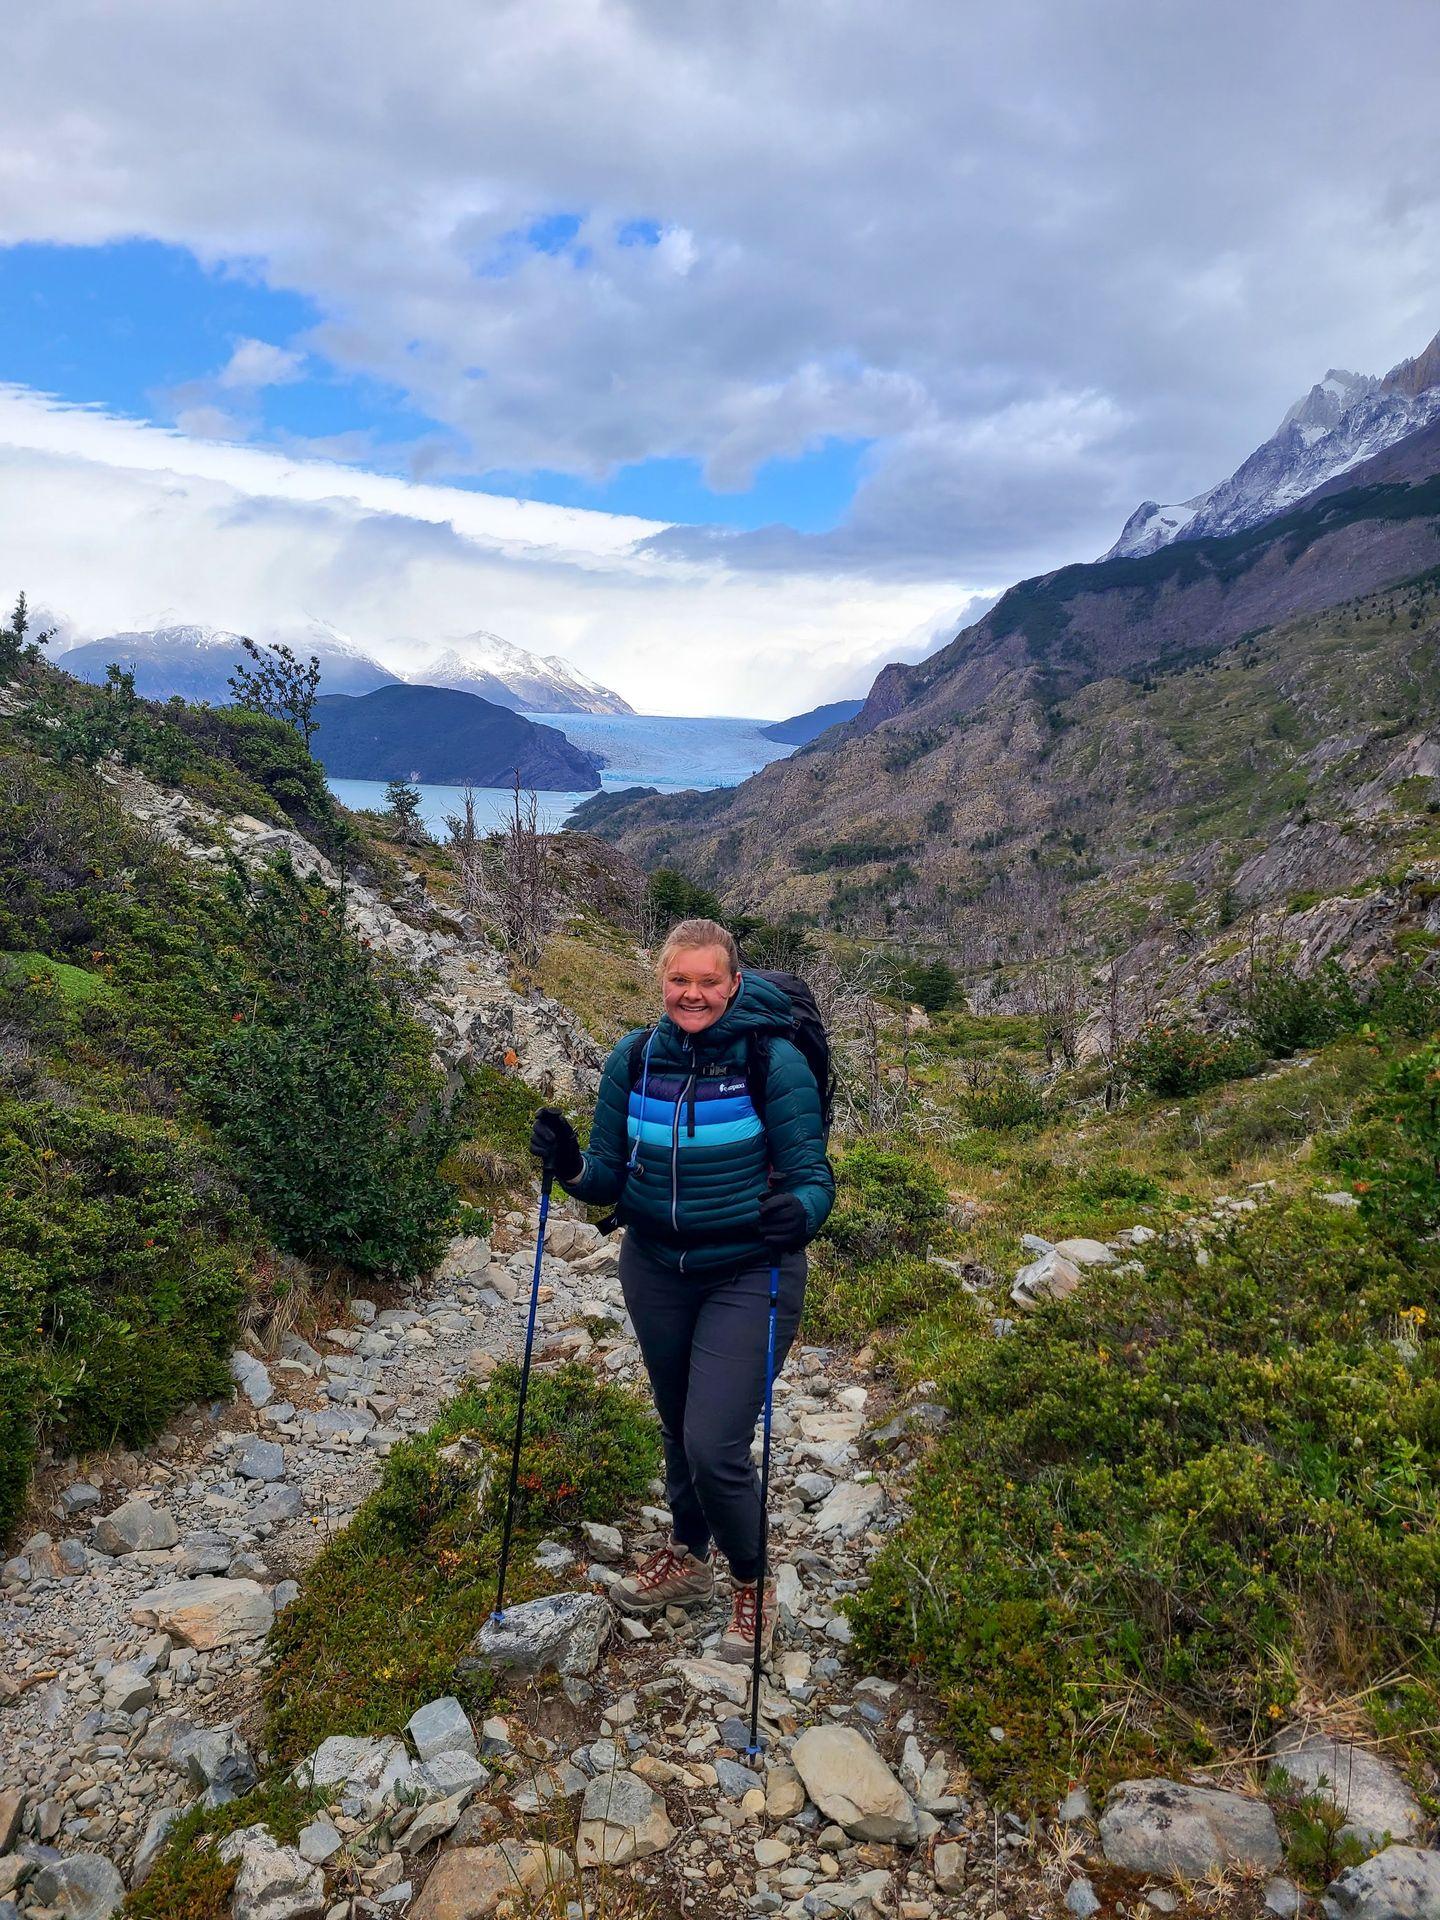 Lydia on a trail with a glacier in the background. She is wearing a Cotopaxi puffer jacket and holding hiking poles.